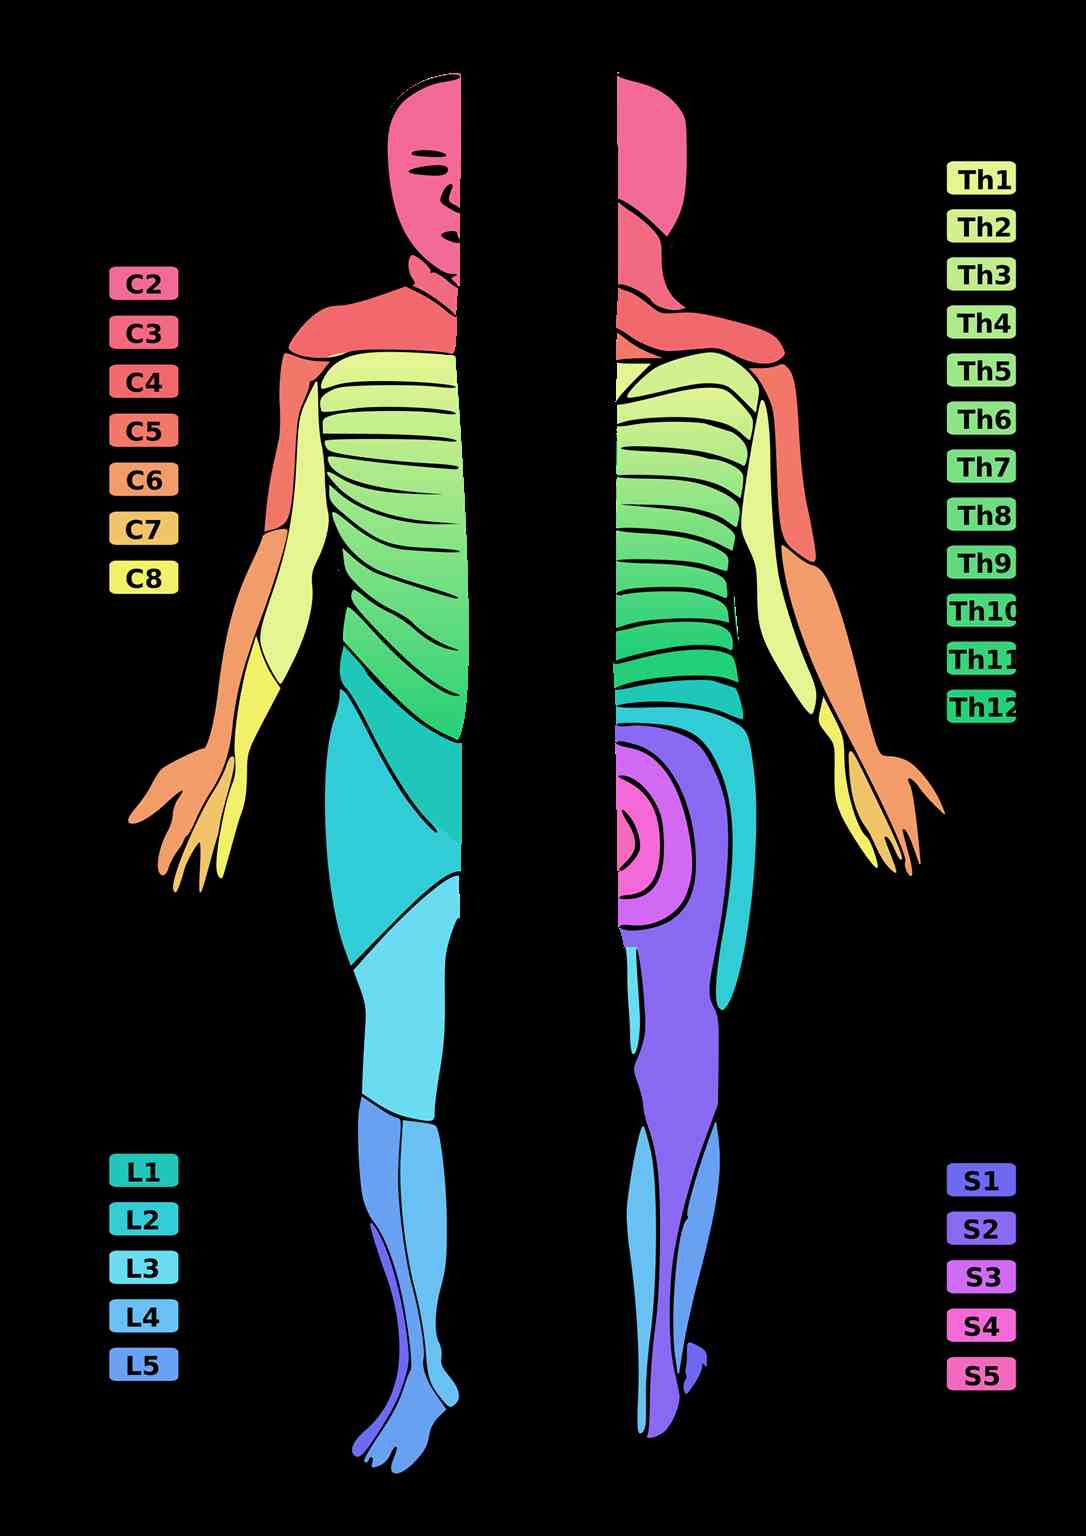 A diagram showing human dermatomes, i.e., skin regions with respect to the routing of their afferent nerves through the spinal cord.